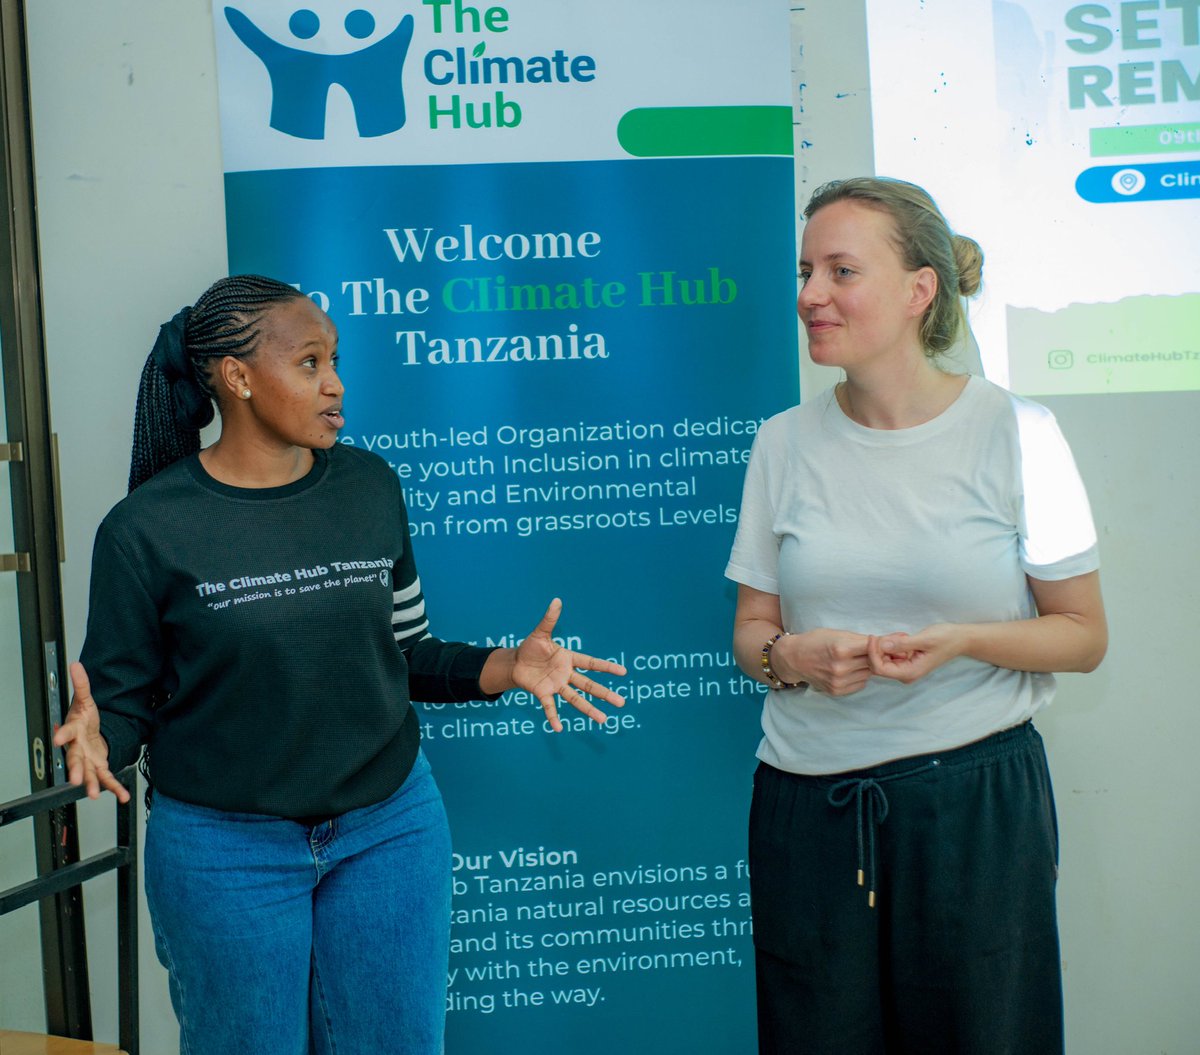 An enlightening and enjoyable day 1 training session in Arusha City! 

Delving into climate change impacts, solutions, and entrepreneurship with humor and inspiration 💡

Grateful for the round one CH climate fellows by Climate KIC! 🌱🌍

#CHCommunity #EITCommunity !